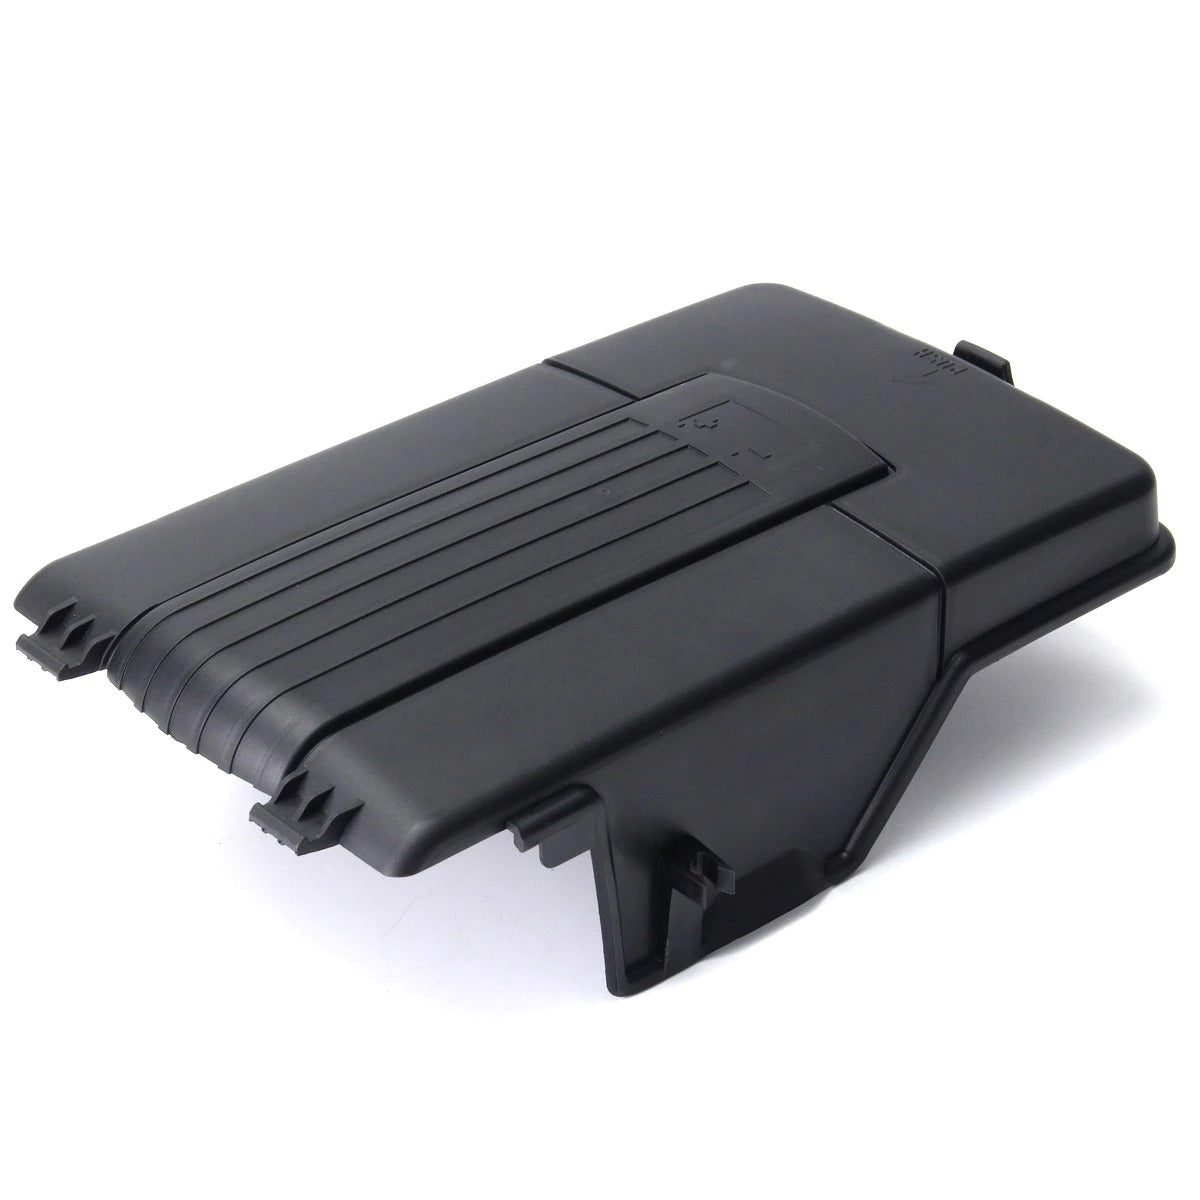 Battery Cover Top Lid Tray Fits suitable for VW Golf MK5 6 Jetta MK6 Passat B6 Tiguan Scirocco